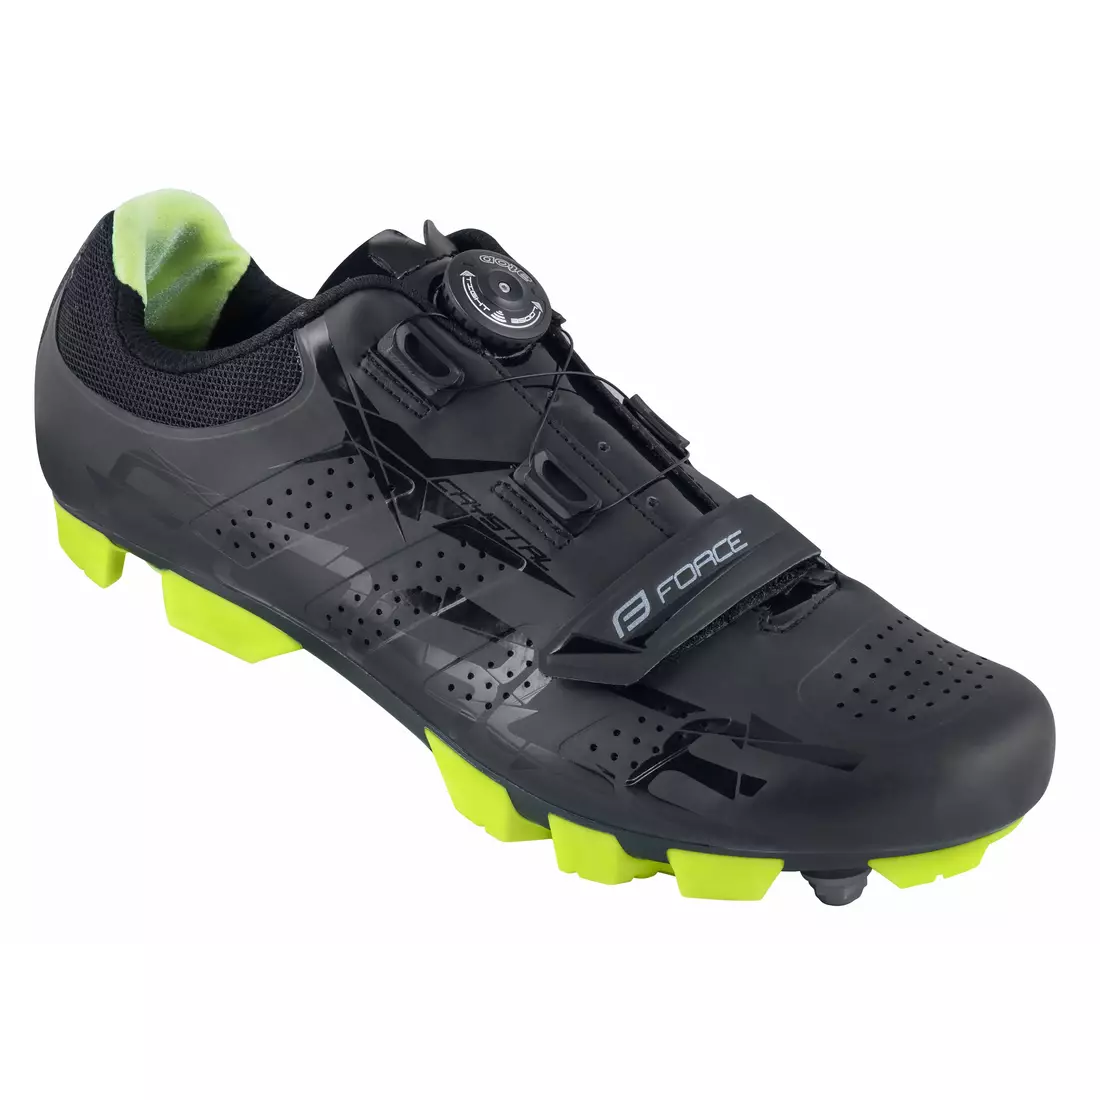 FORCE MTB CRYSTAL bicycle shoes, black-fluor